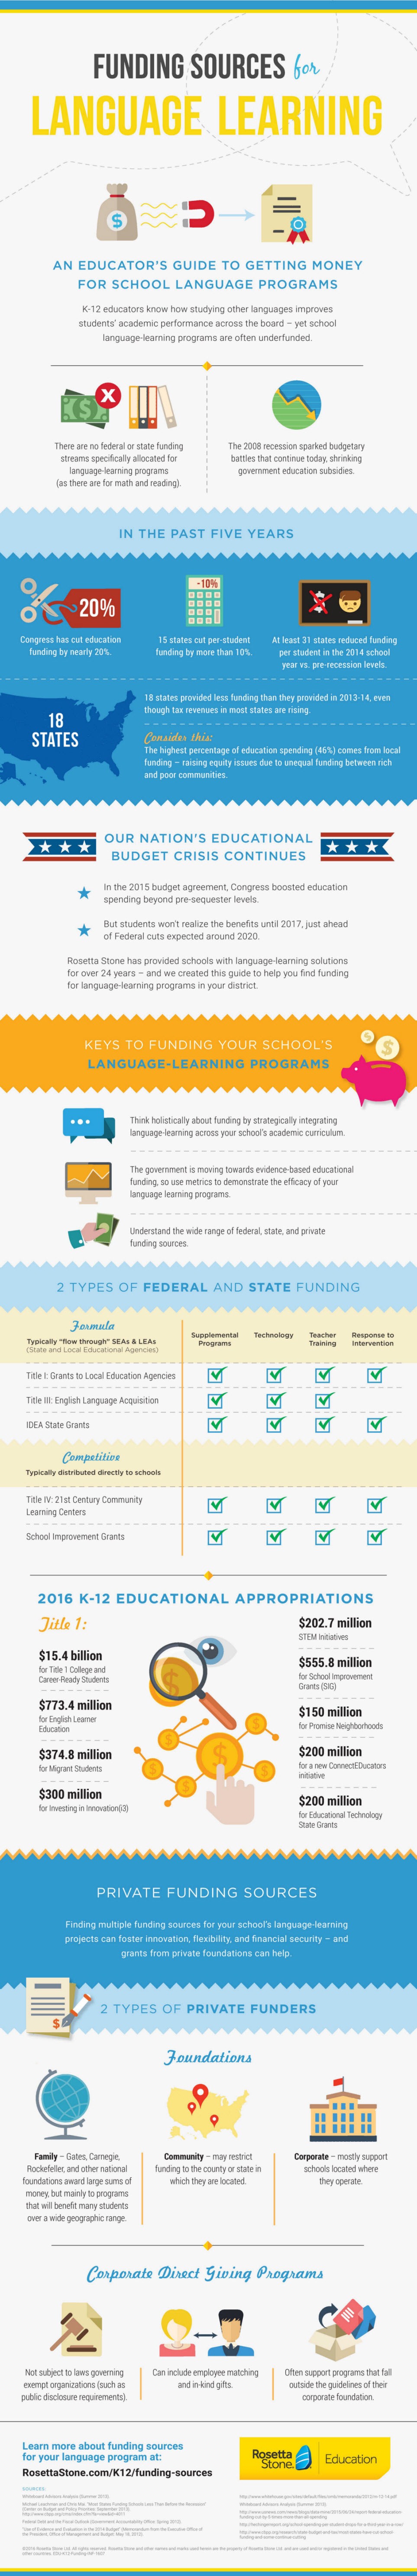 Funding Sources for Language Learning Infographic